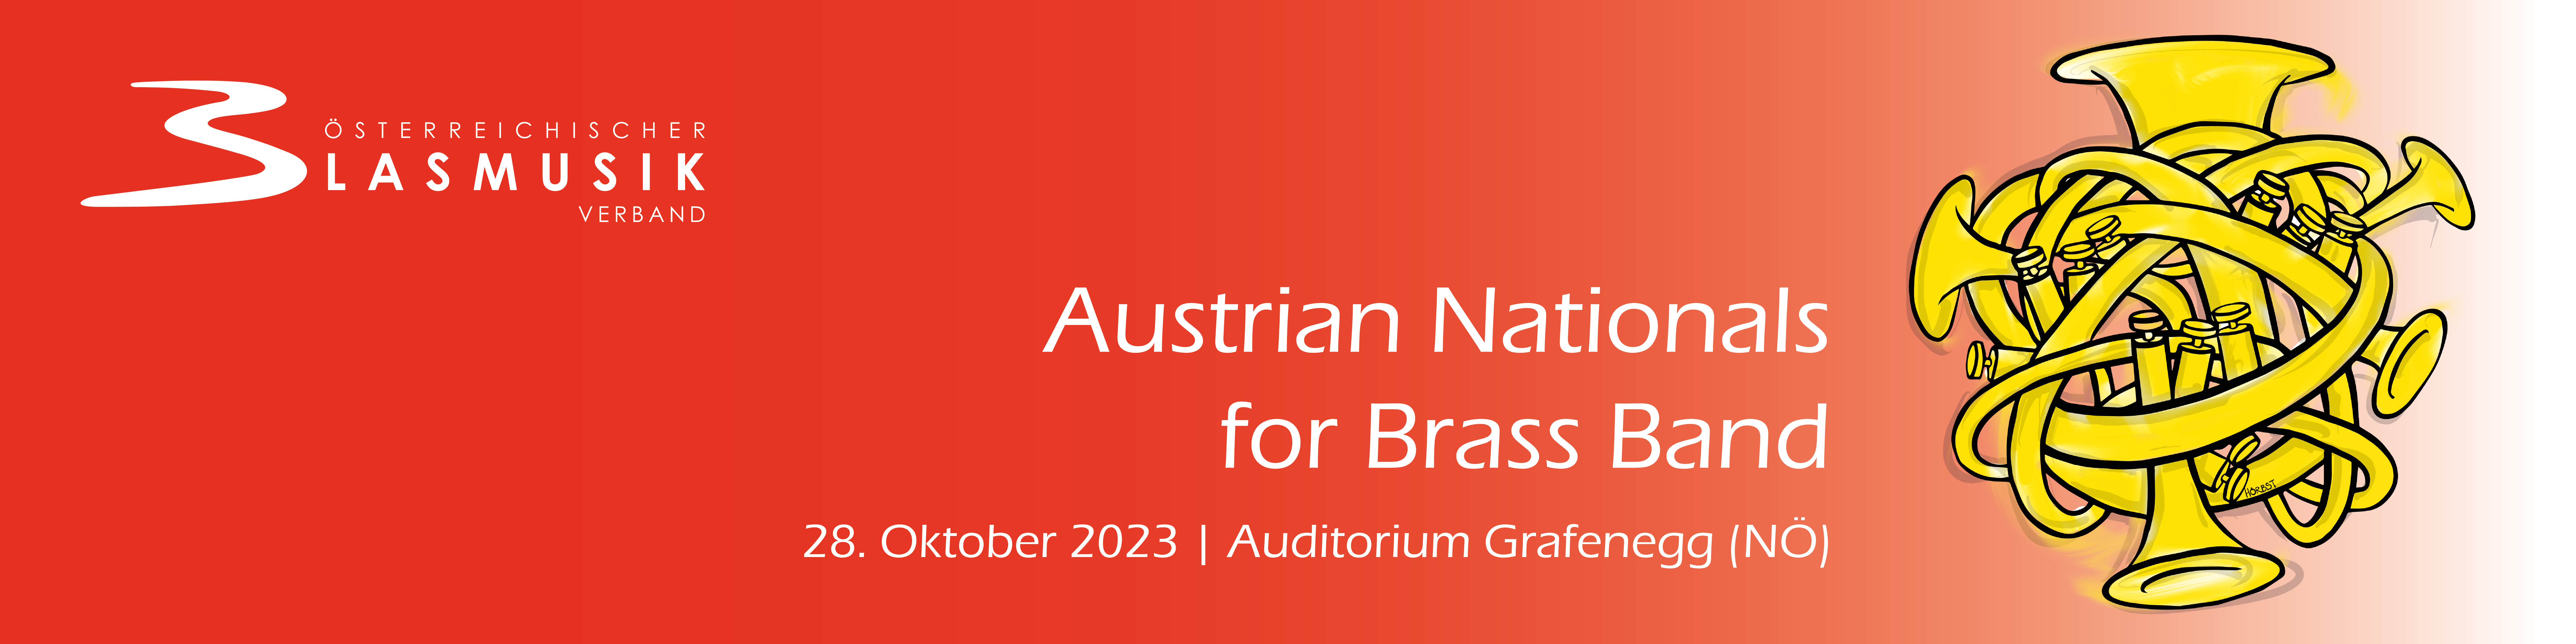 Sujet_Austrian Nationals for Brass Band